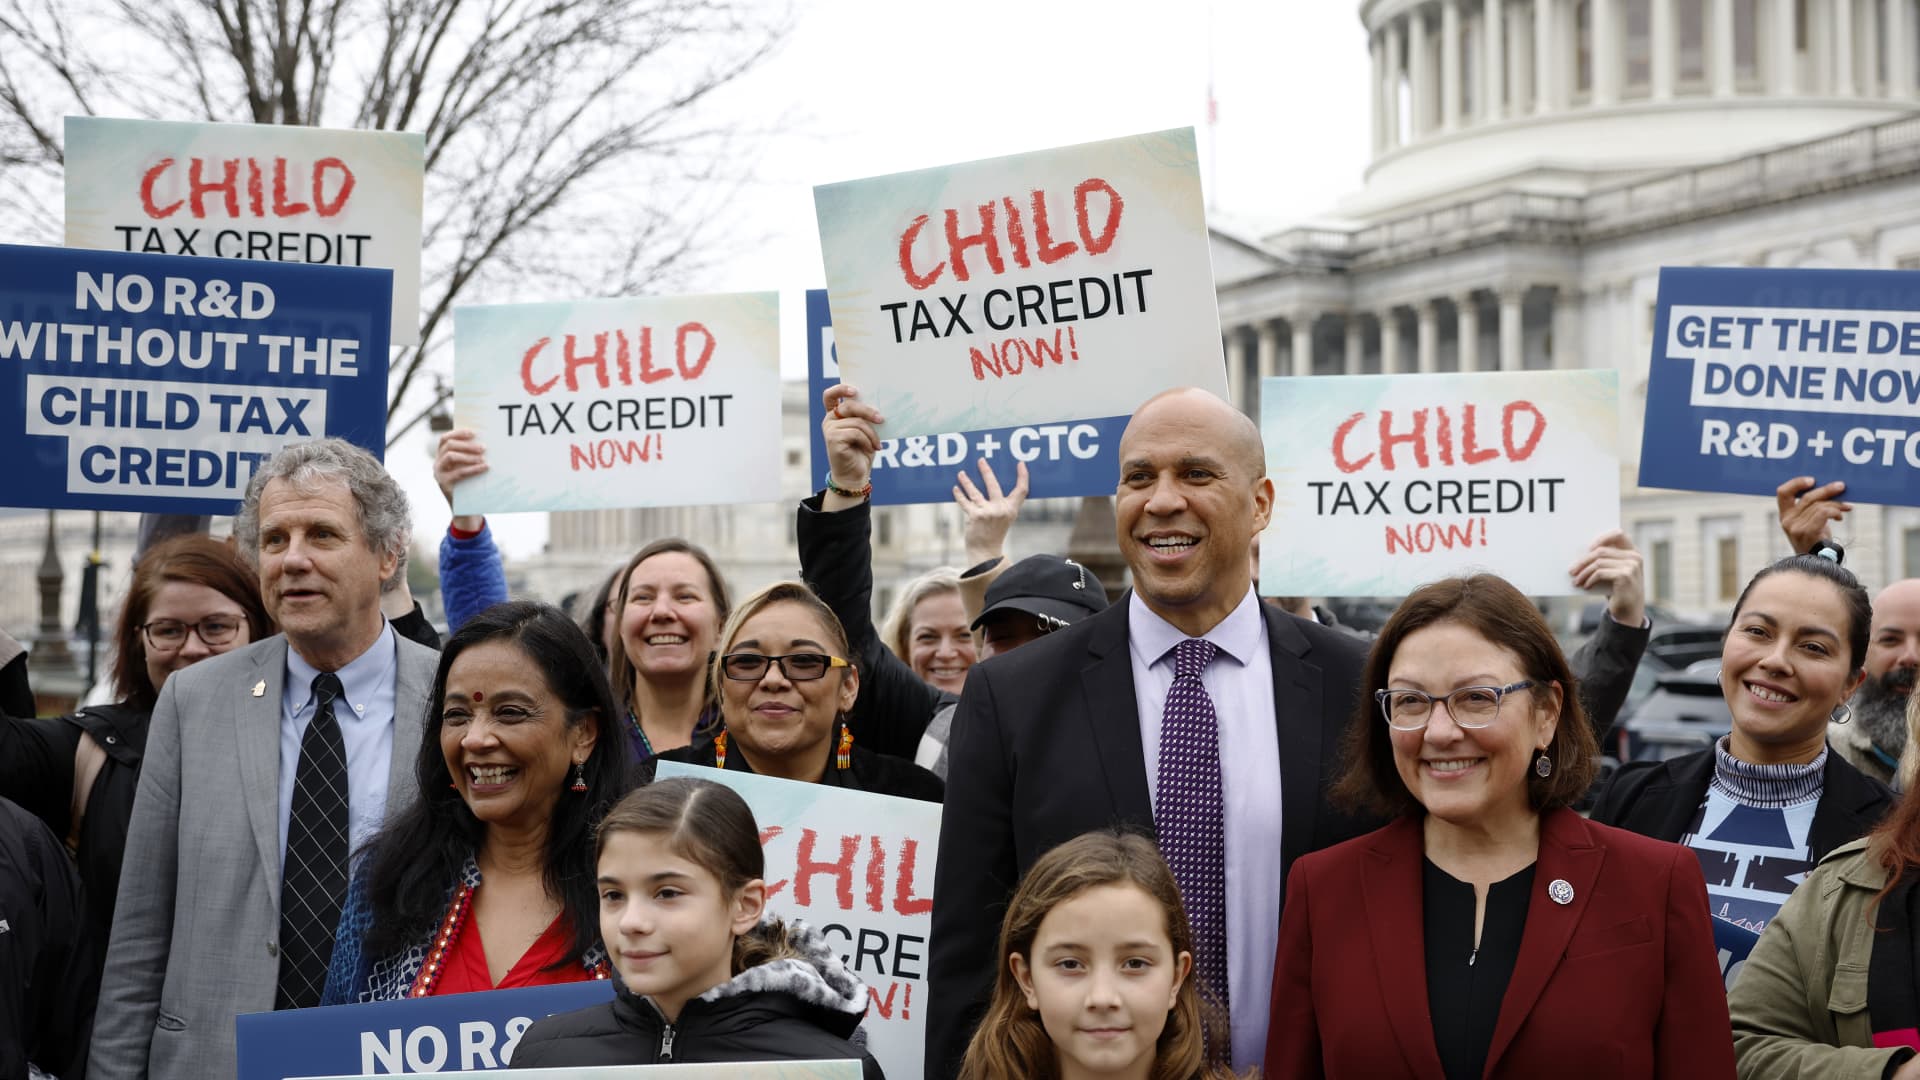 Senator Sherrod Brown, D-Ohio, Senator Cory Booker, D-N.J., and Rep. Suzan DelBene, D-Wash., with supporters during press briefing on expanding the child tax credit during the lame duck session on Dec. 7 in Washington, D.C.